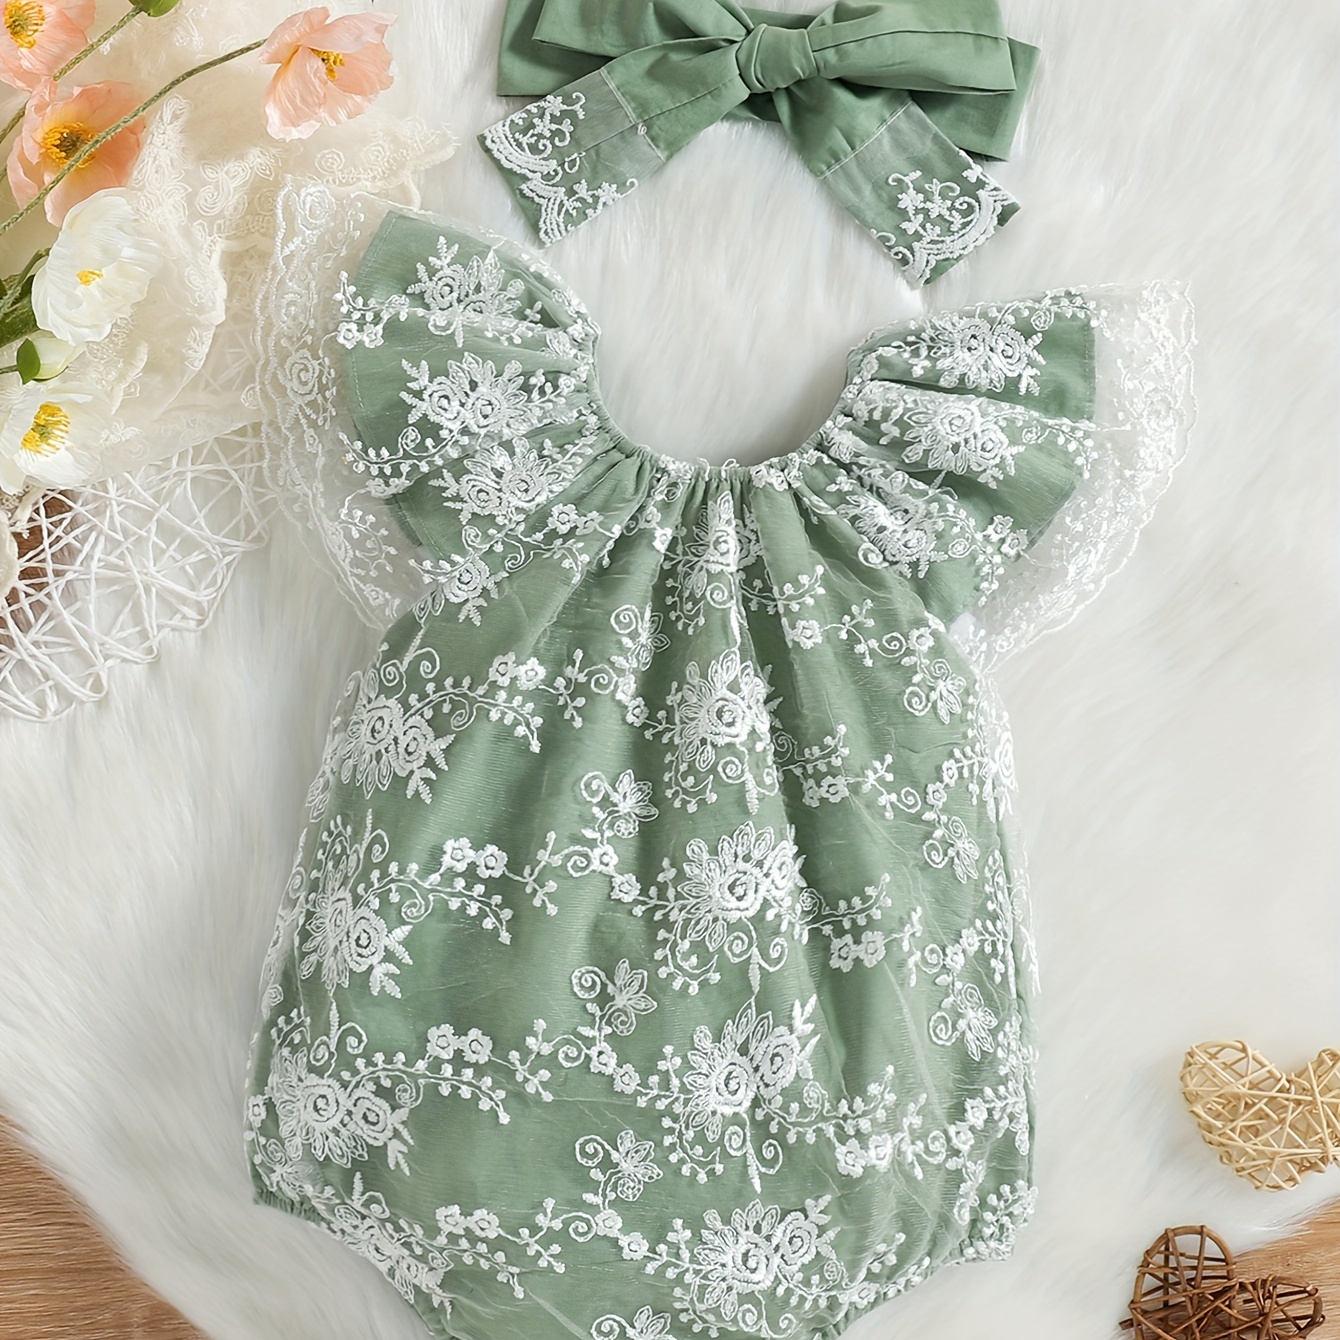 

Baby's Princess Style Lace Embroidered Triangle Bodysuit, Casual Lovely Cap Sleeve Romper, Toddler & Infant Girl's Onesie For Summer Birthday Party, As Gift